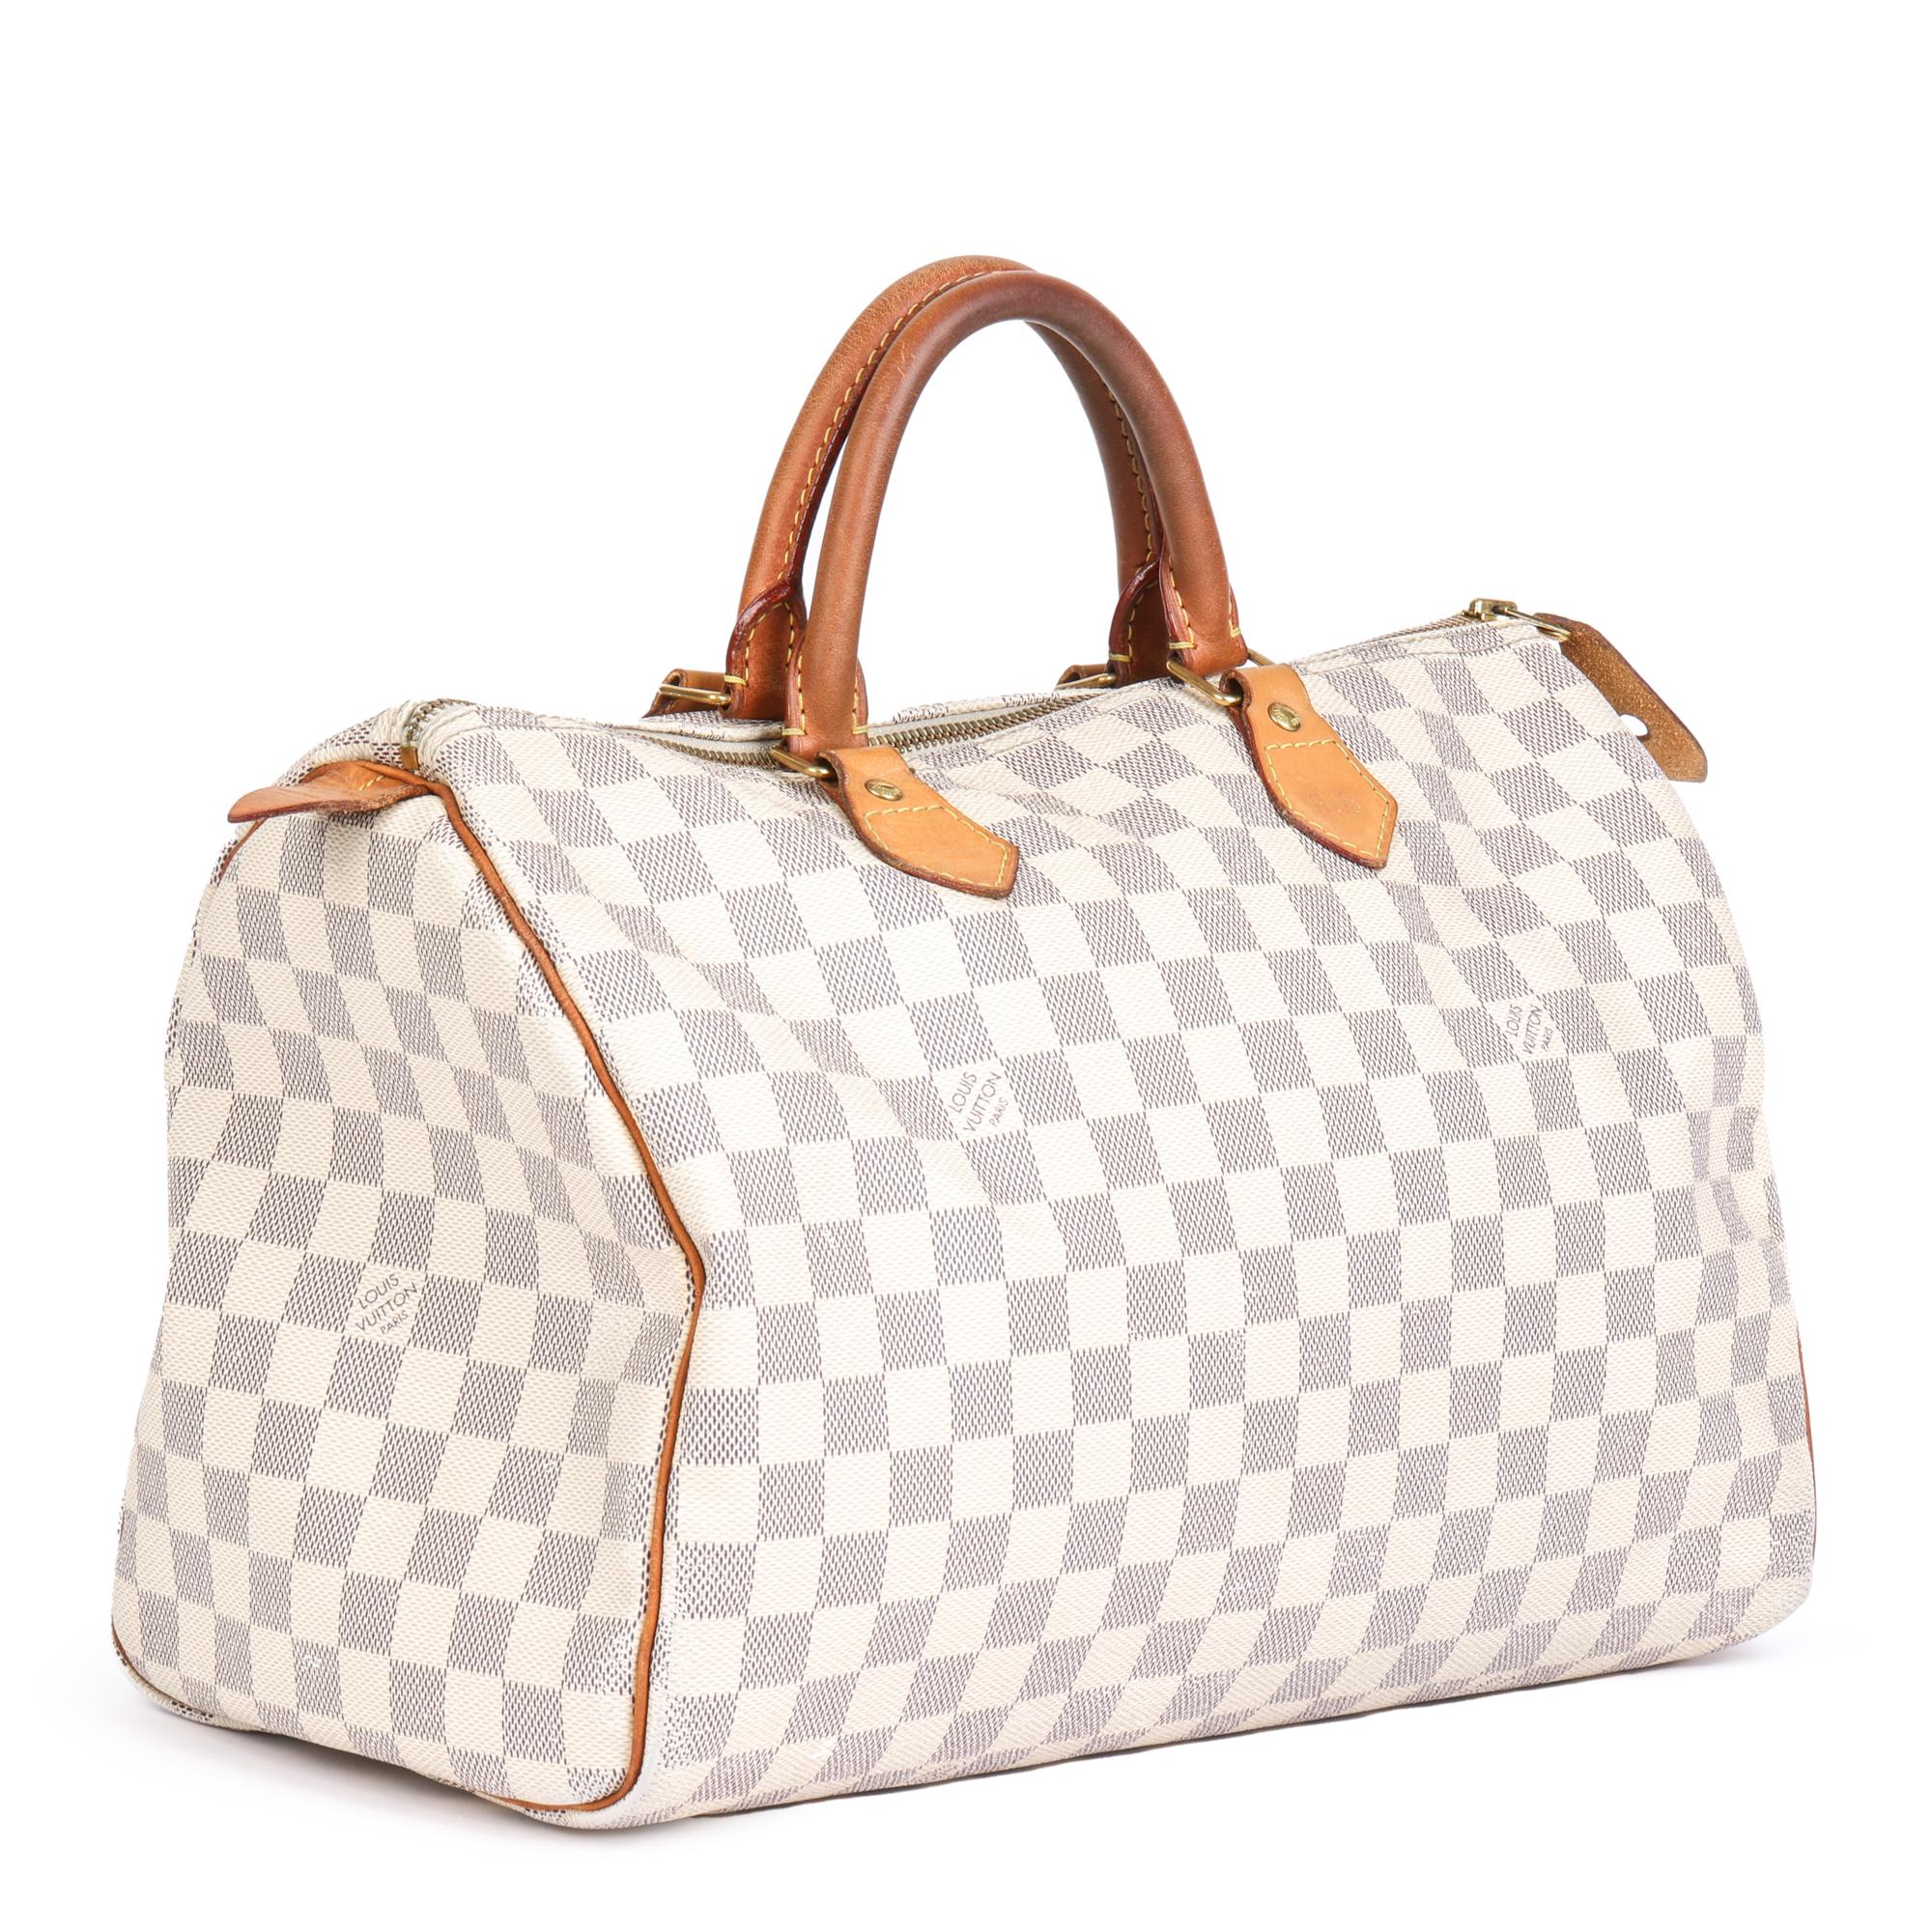 LOUIS VUITTON
Damier Azur Coated Canvas Speedy 35

Xupes Reference: CB620
Serial Number: BA4131
Age (Circa): 2011
Authenticity Details: Date Stamp (Made in France)
Gender: Ladies
Type: Tote

Colour: Beige
Hardware: Golden Brass
Material(s): Coated